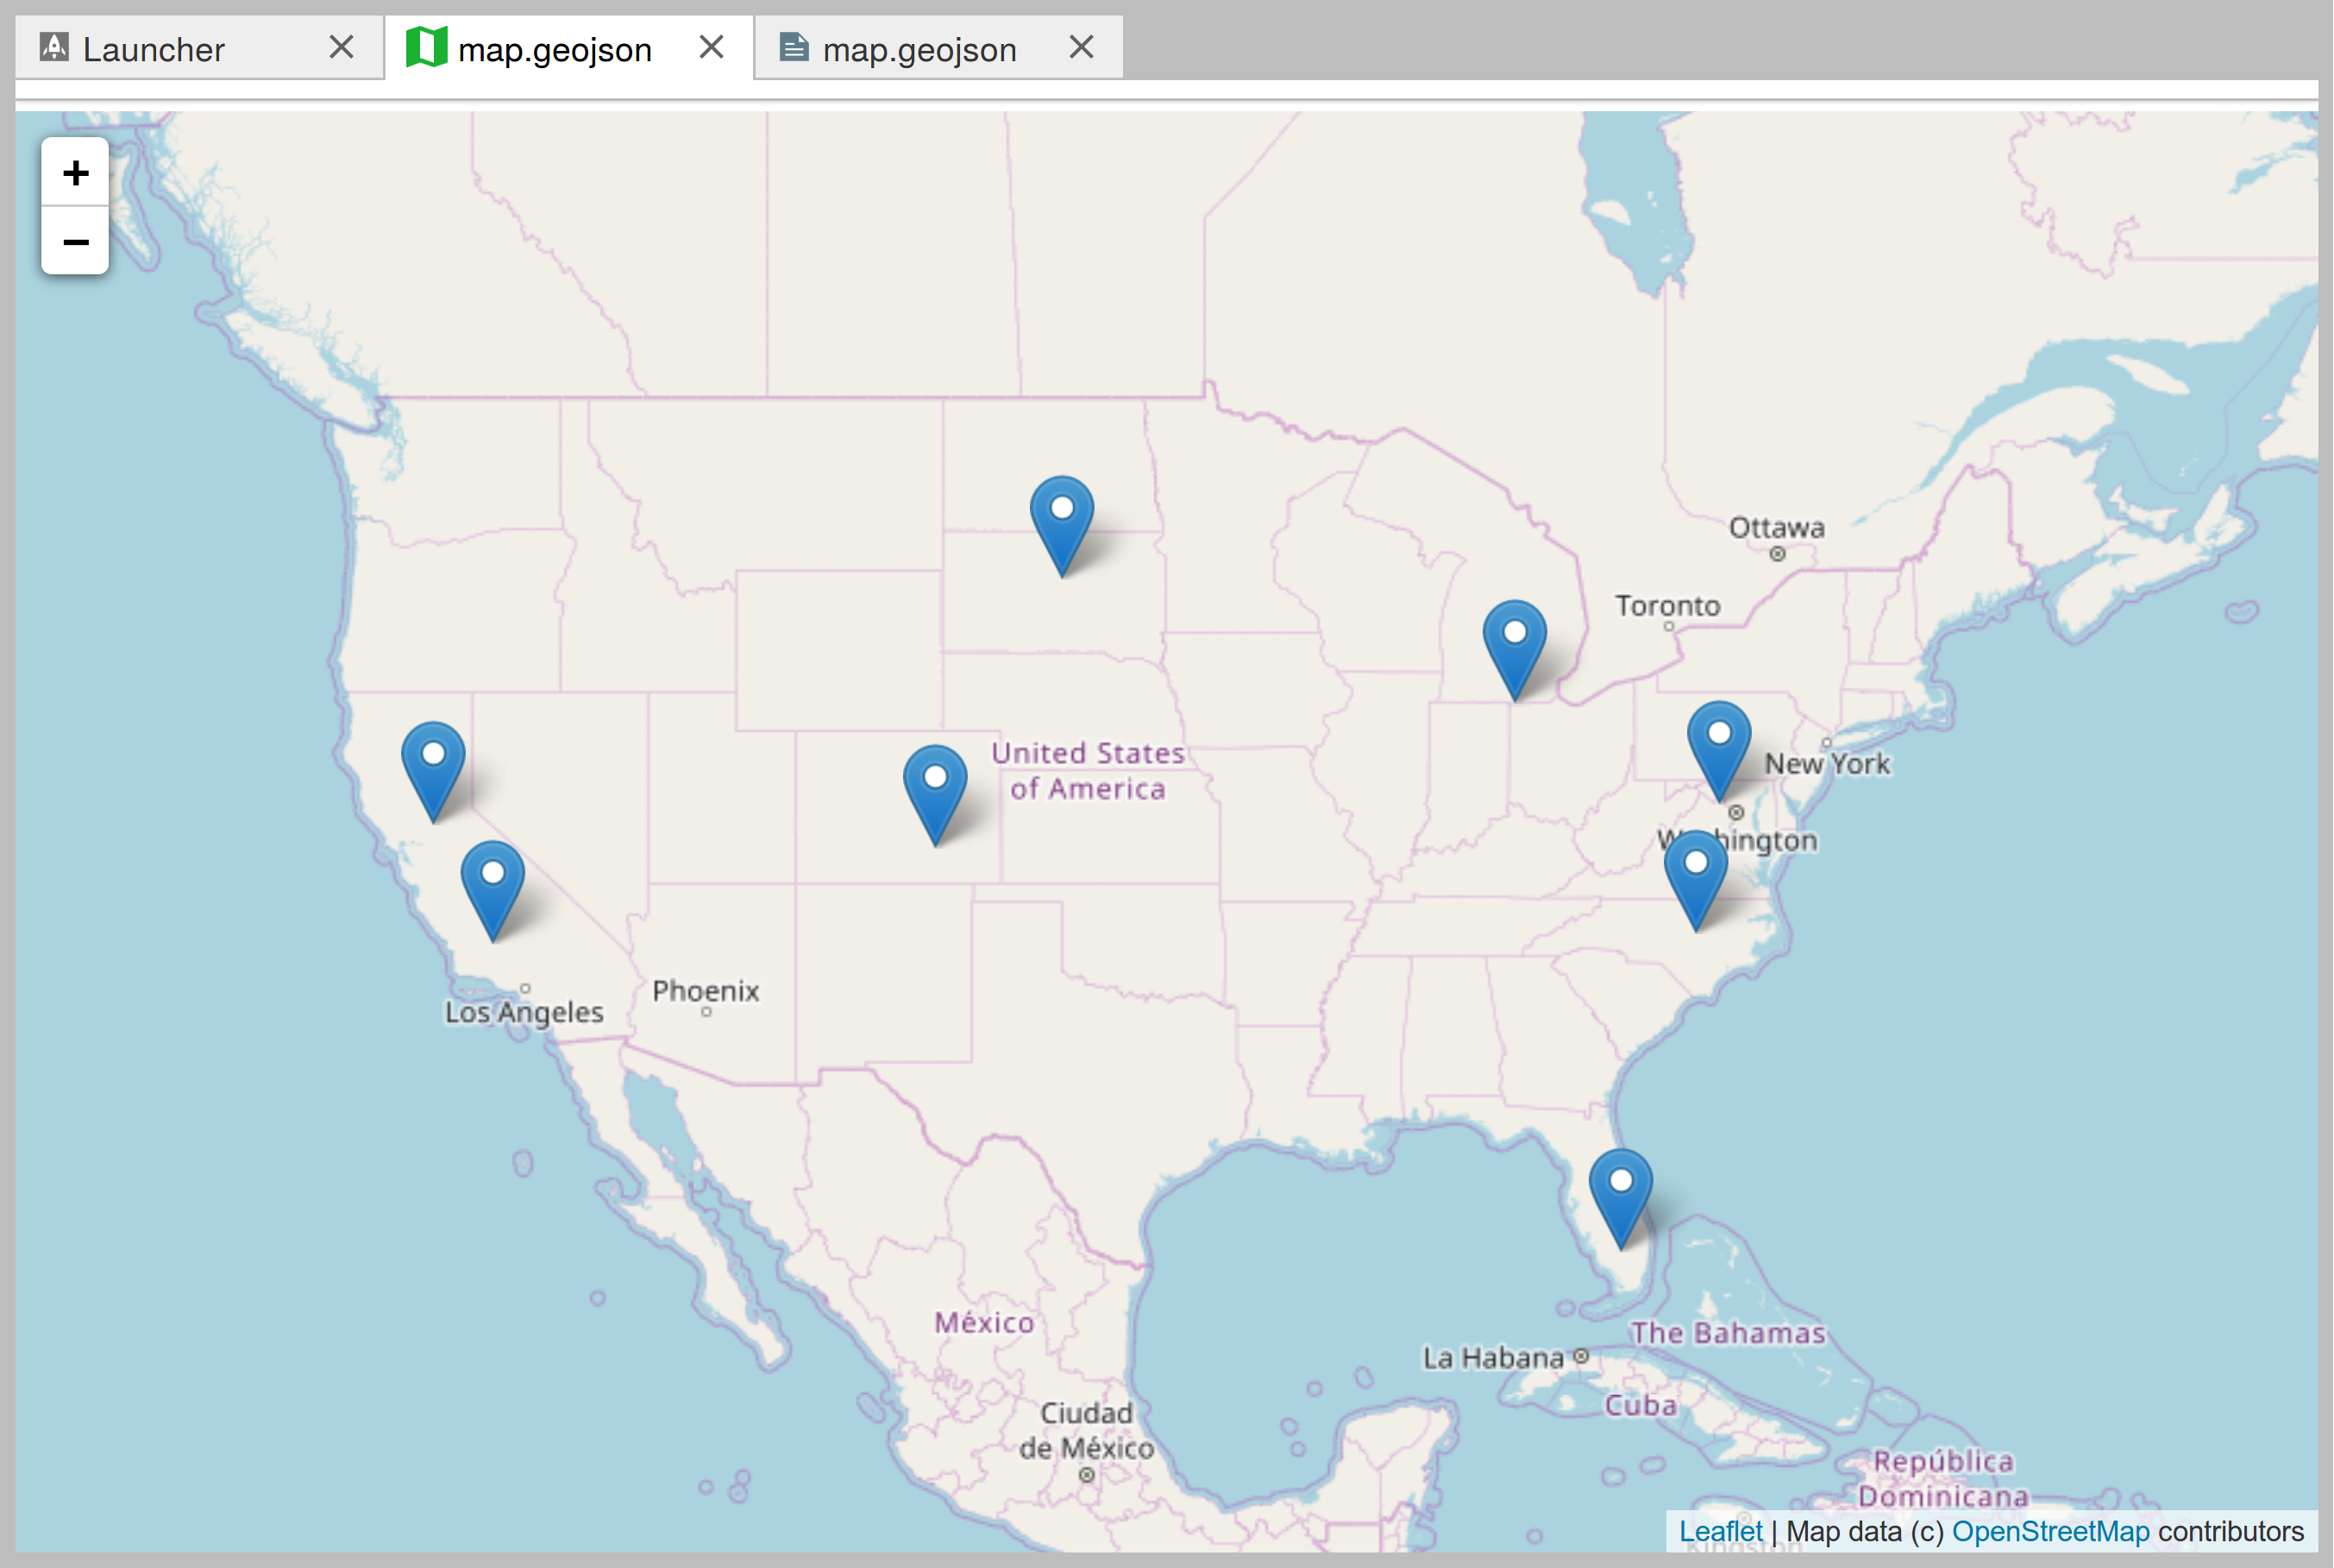 Viewing a GeoJSON file